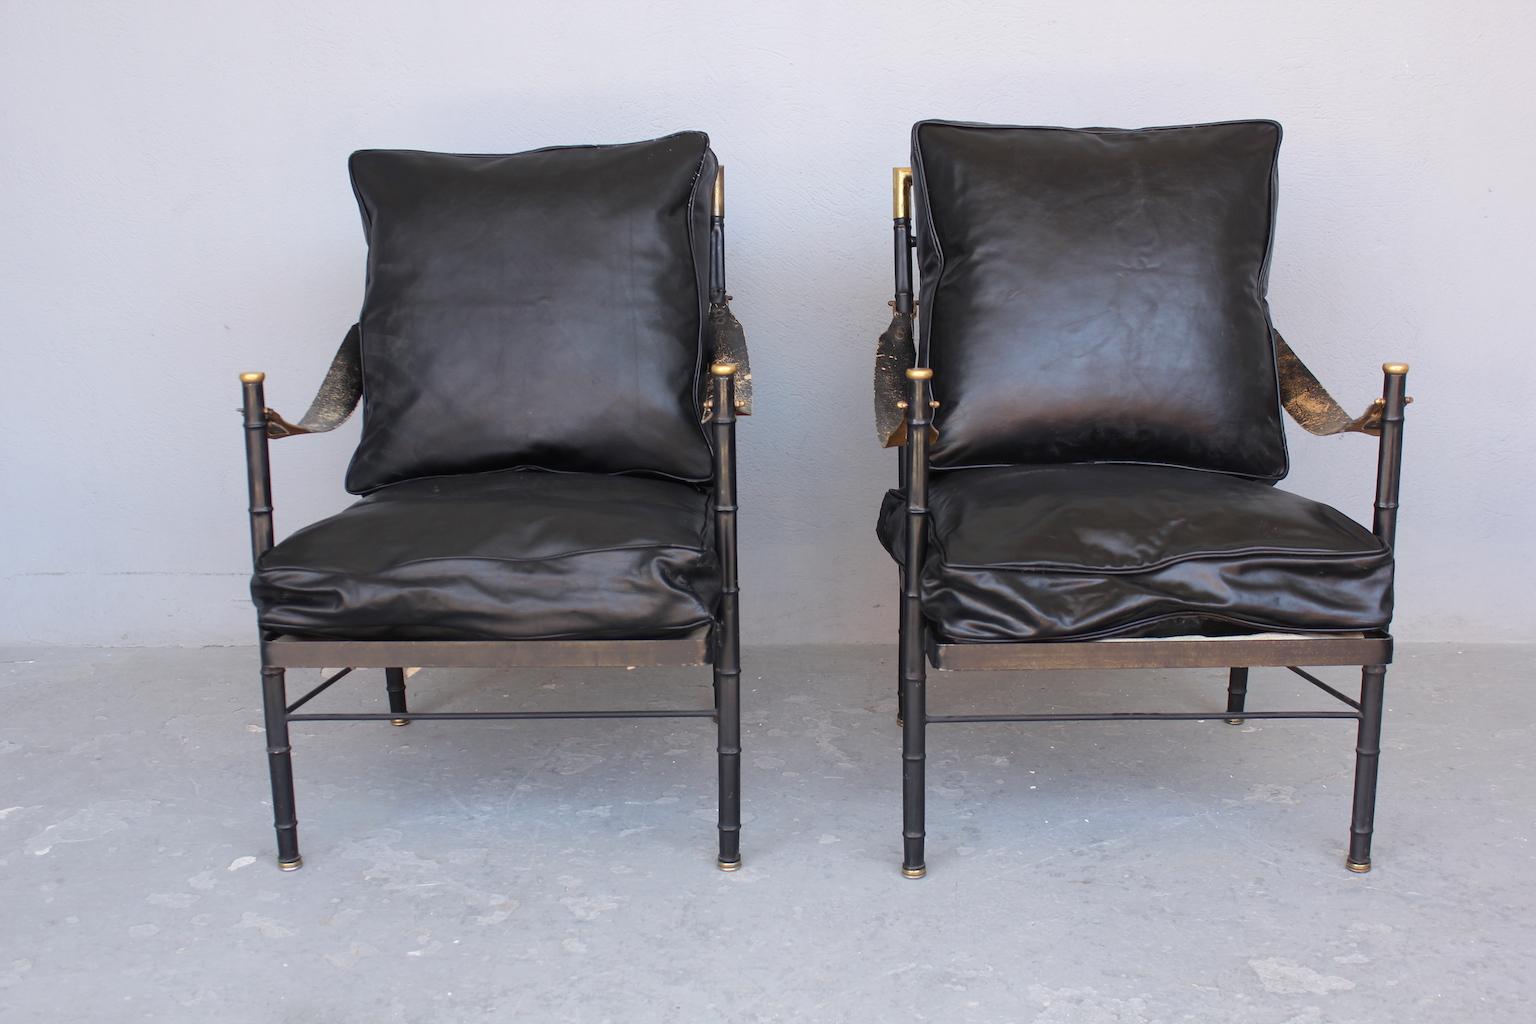 1940 pair of armchairs, Jacques Adnet or Gilbert Poillerat.
The leather cushions have been restored. Original armrests consistent with age and use, but we can restore them.
Dimensions: Height 80cm, depth 80cm, width 56.5 cm
Seat: Depth 50cm,